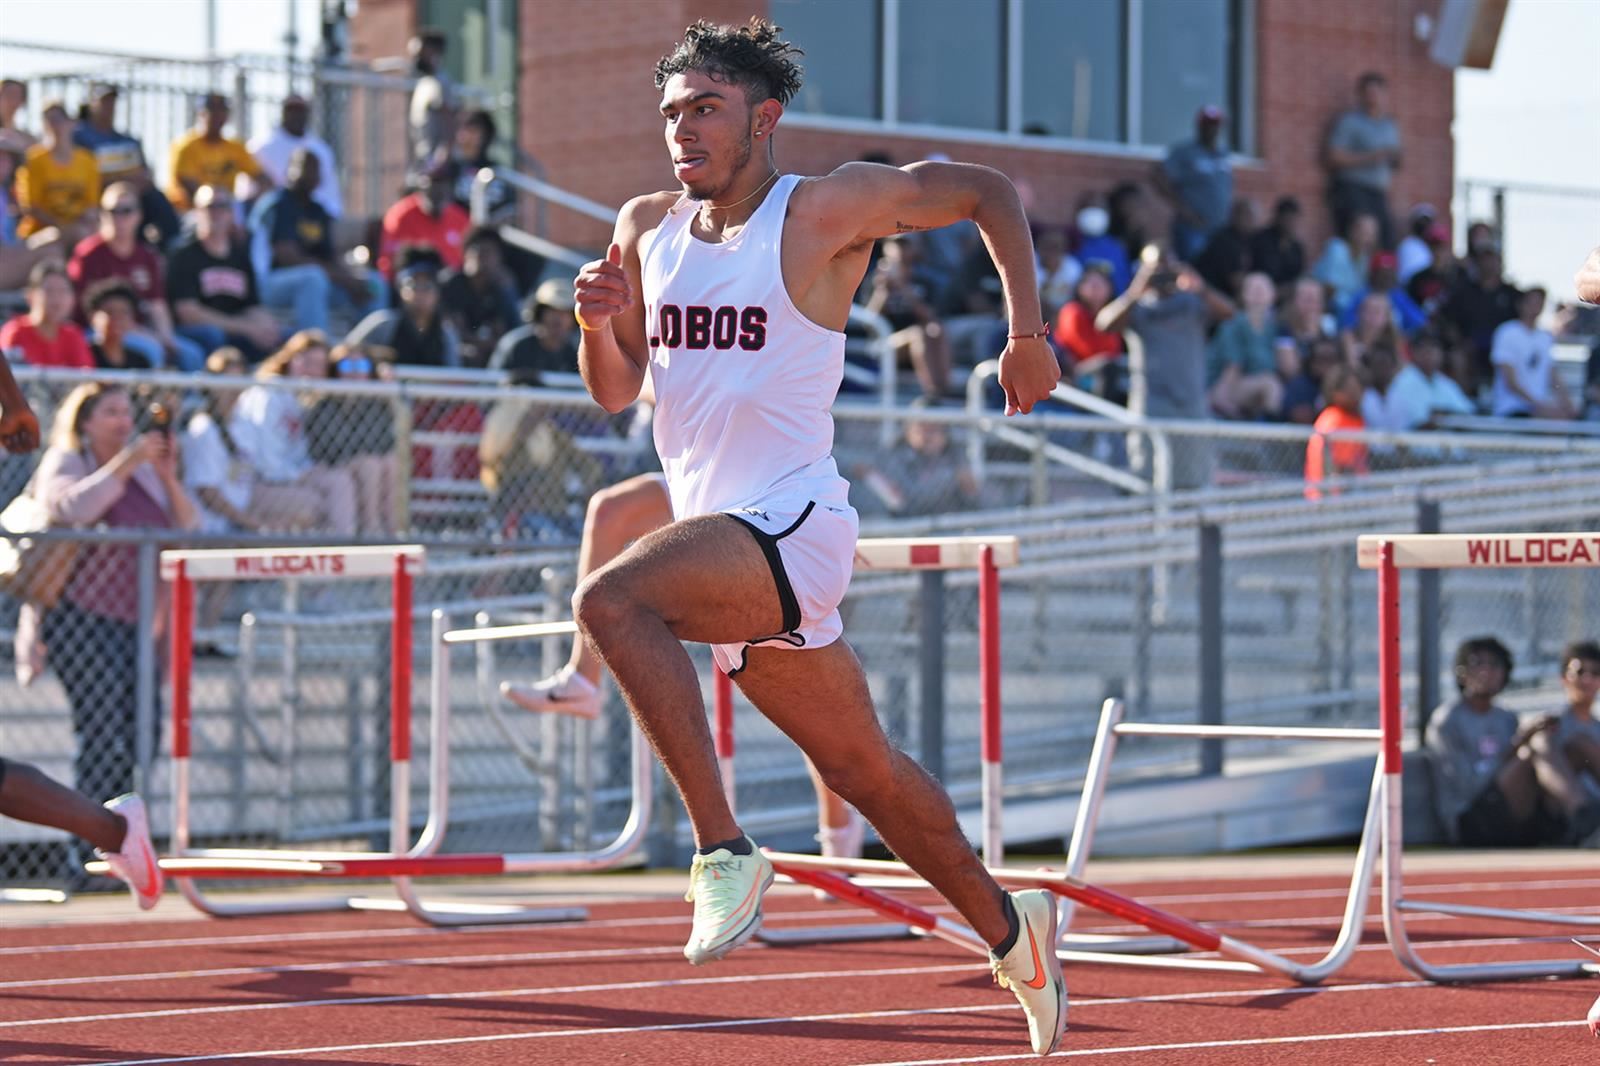 Langham Creek High School junior Alex Ornelas qualified for the UIL Track and Field State Meet in Austin.